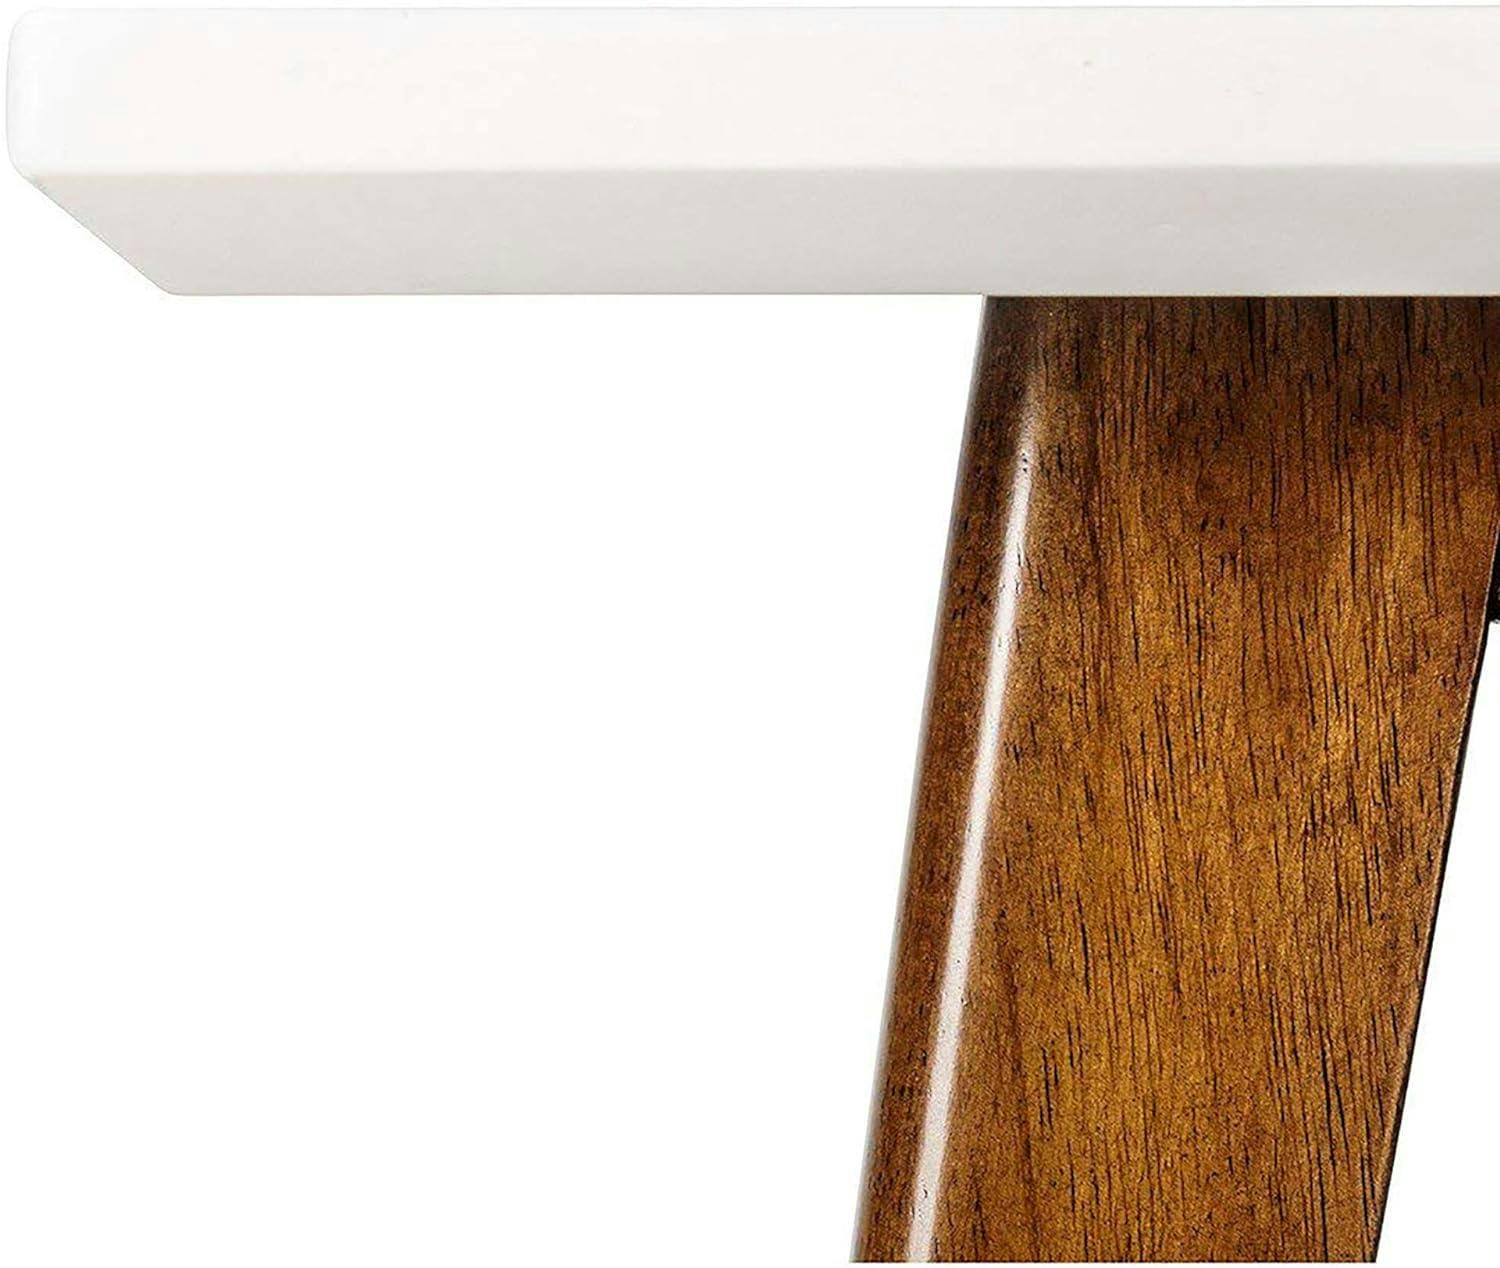 Mid-Century Off-White and Pecan Console Table with Storage Shelf